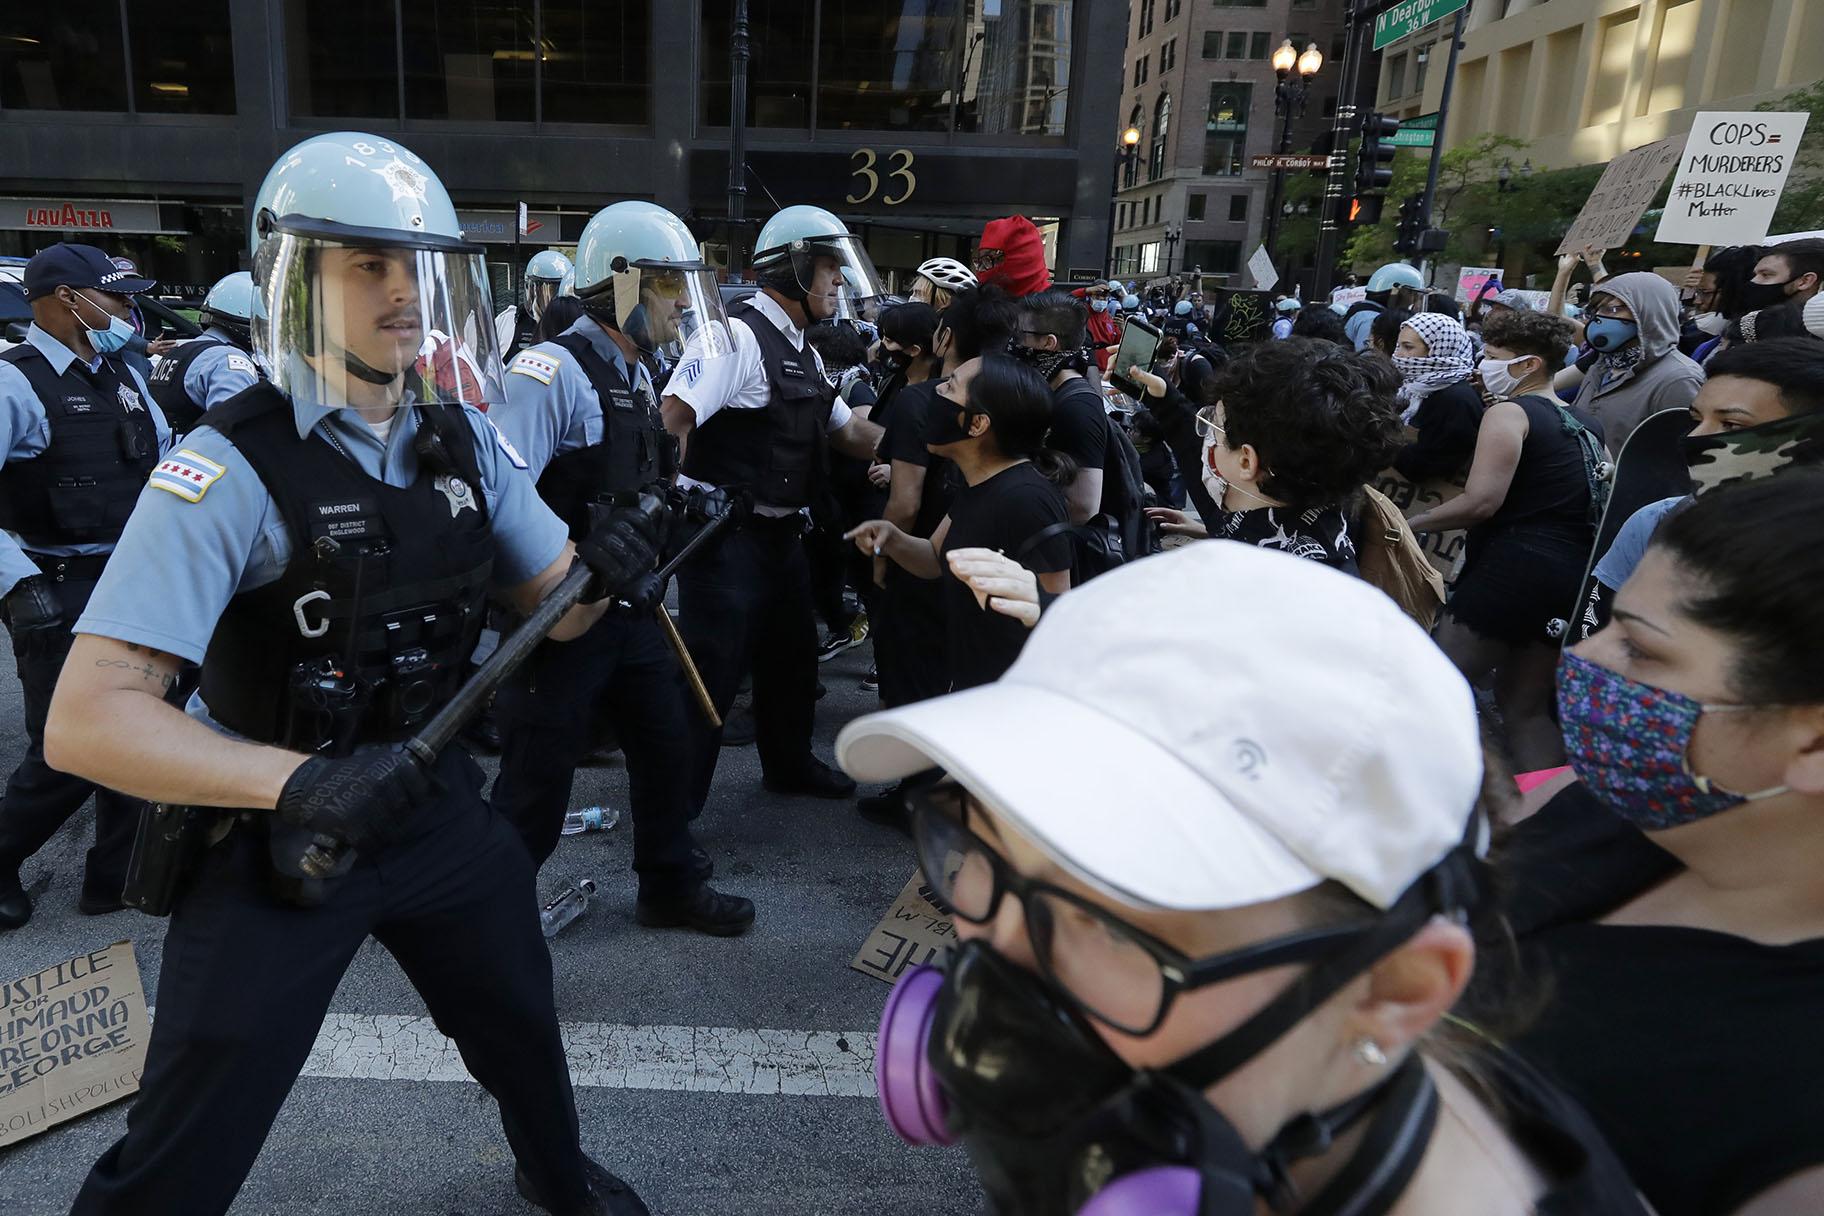 Chicago Police officers and protesters clash during a protest over the death of George Floyd in Chicago, Saturday, May 30, 2020. Floyd died after being taken into custody and restrained by Minneapolis police on Memorial Day in Minnesota. (AP Photo / Nam Y. Huh)